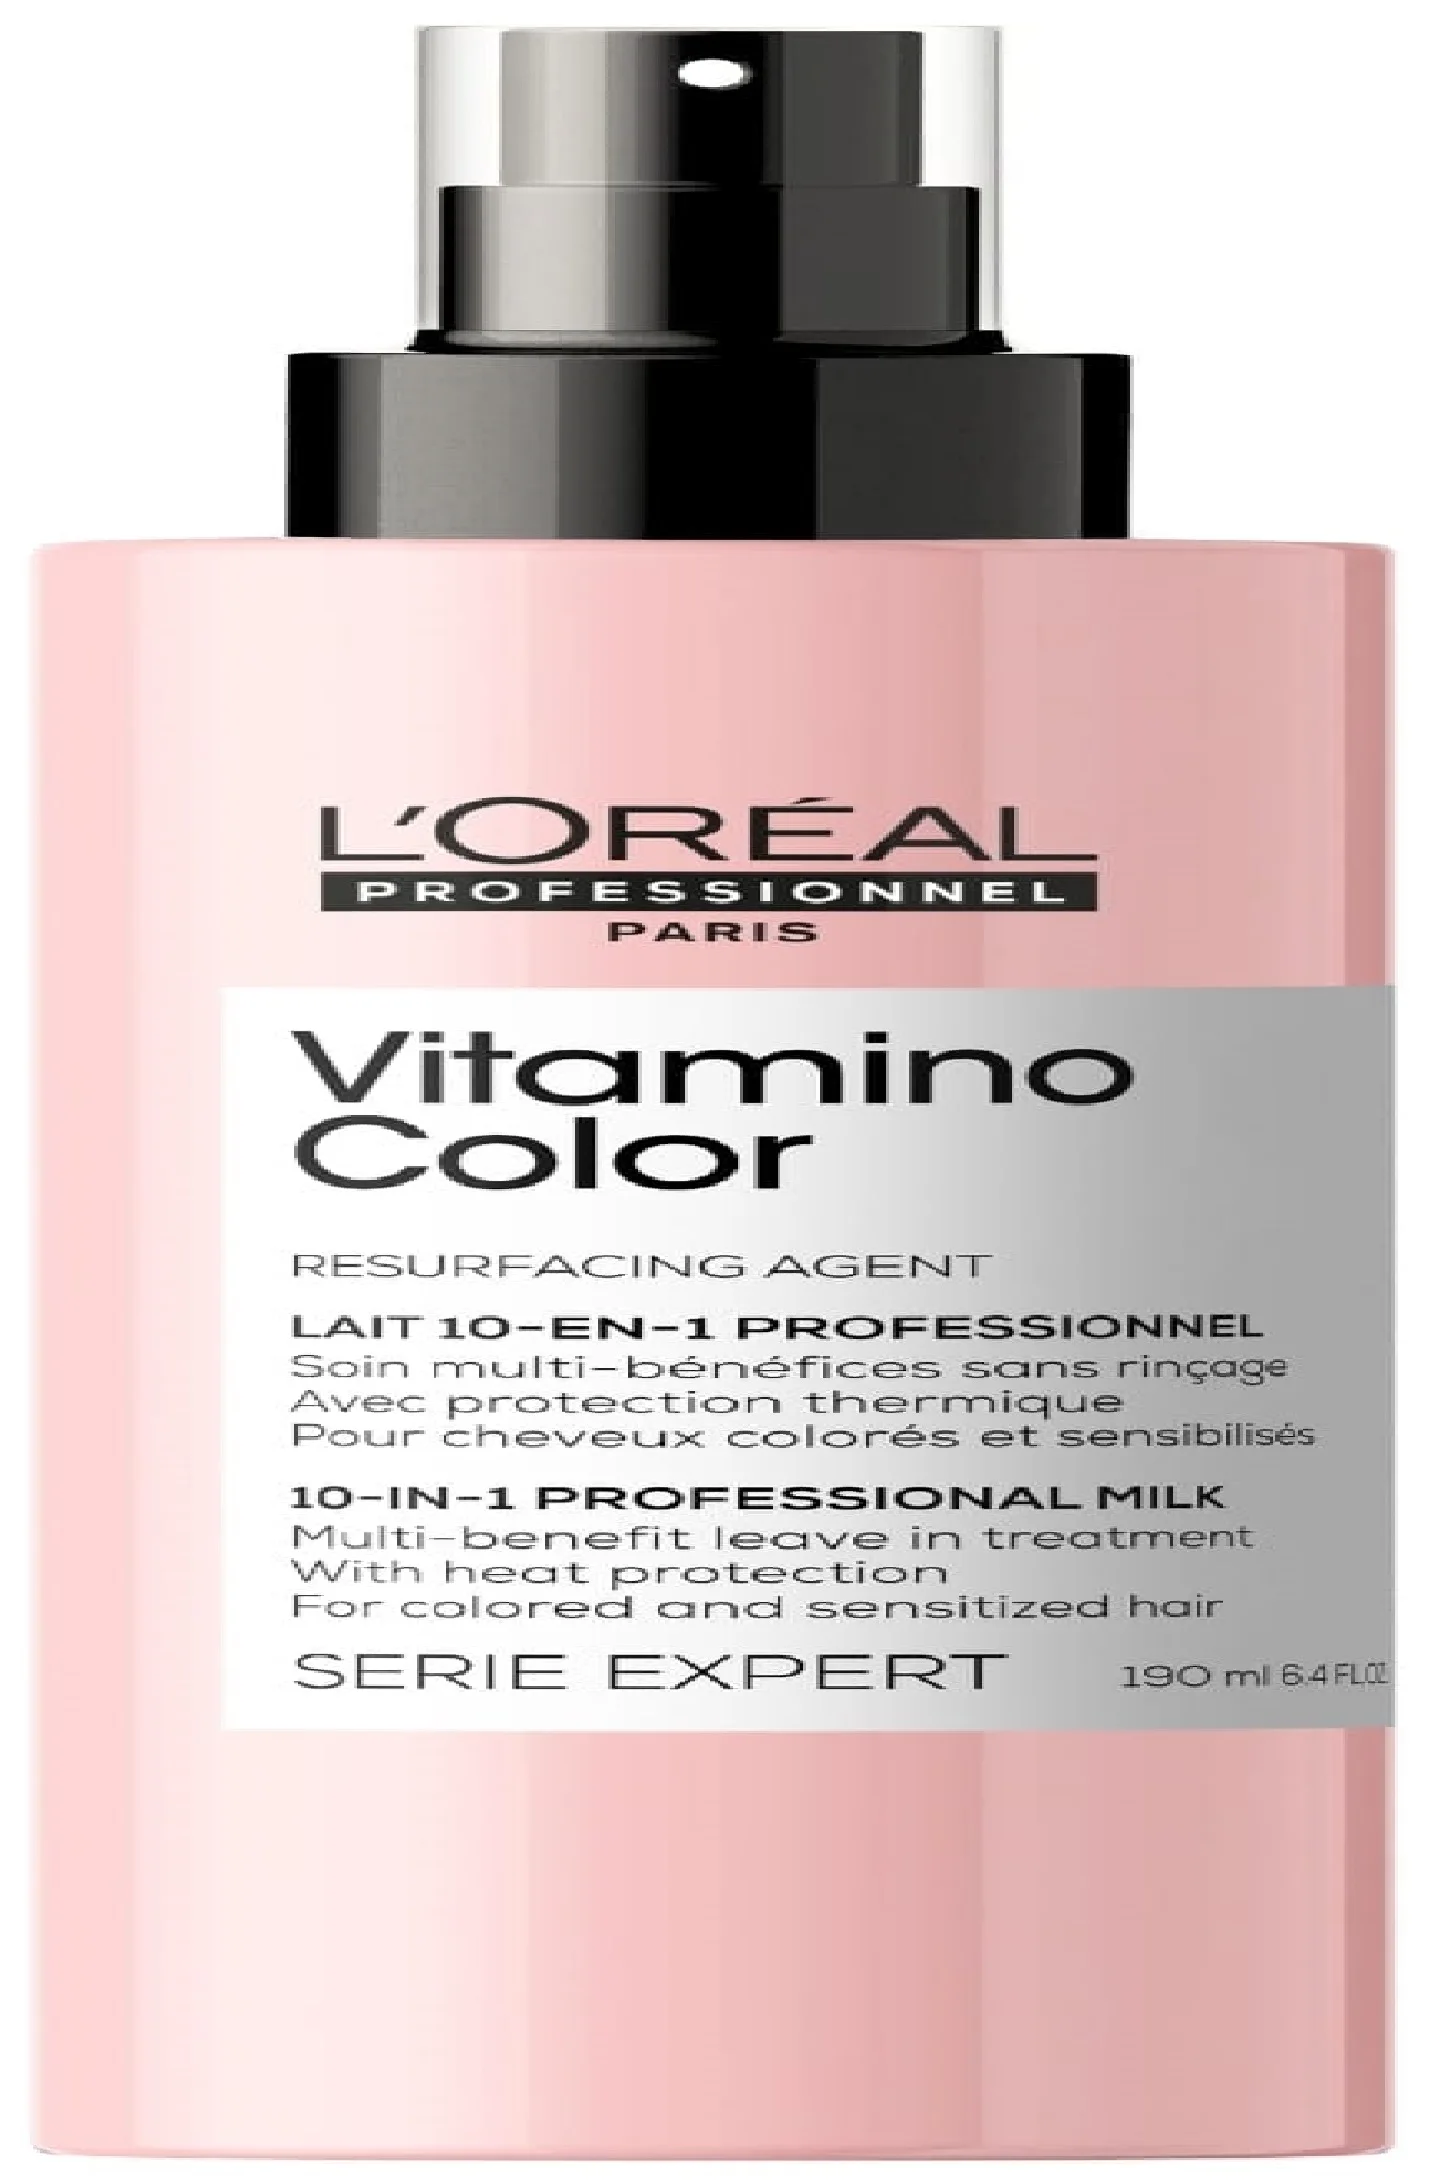 LOREAL VİTAMİNO COLOR   (HAIR HEALTH AND CARE)